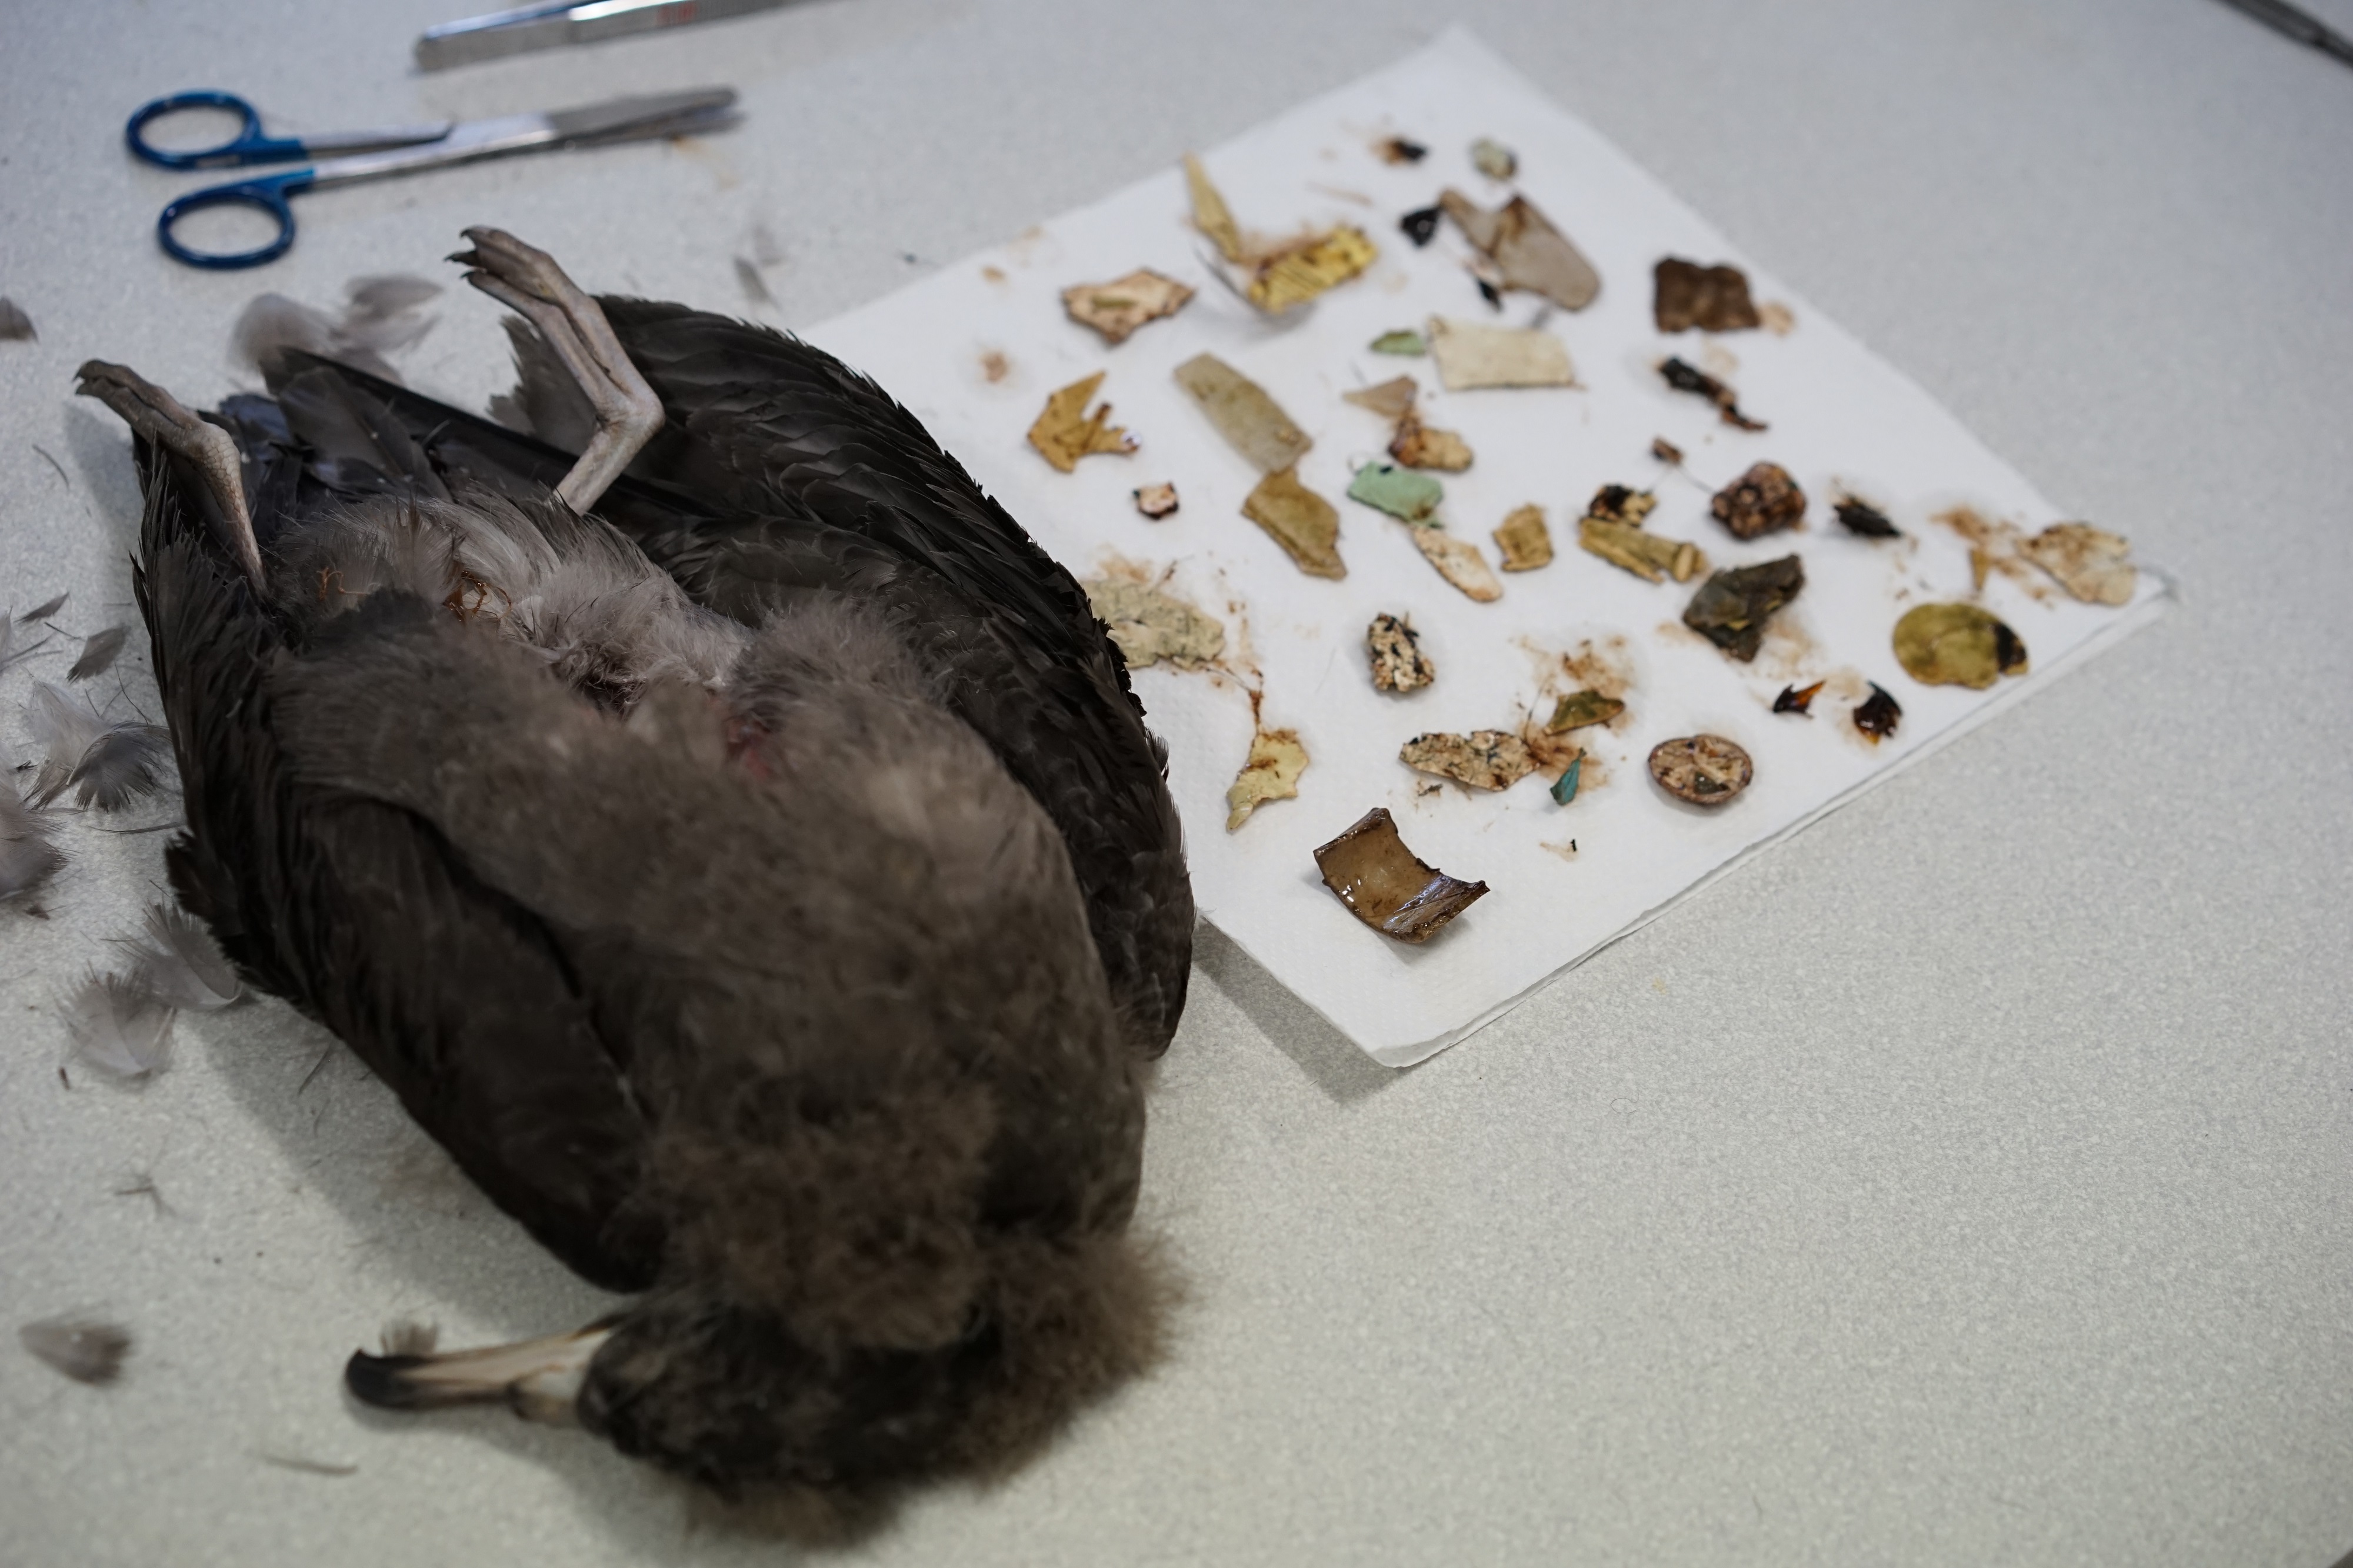 Credit: Cameron Muir. Flesh-footed shearwater necropsy with ingested plastic